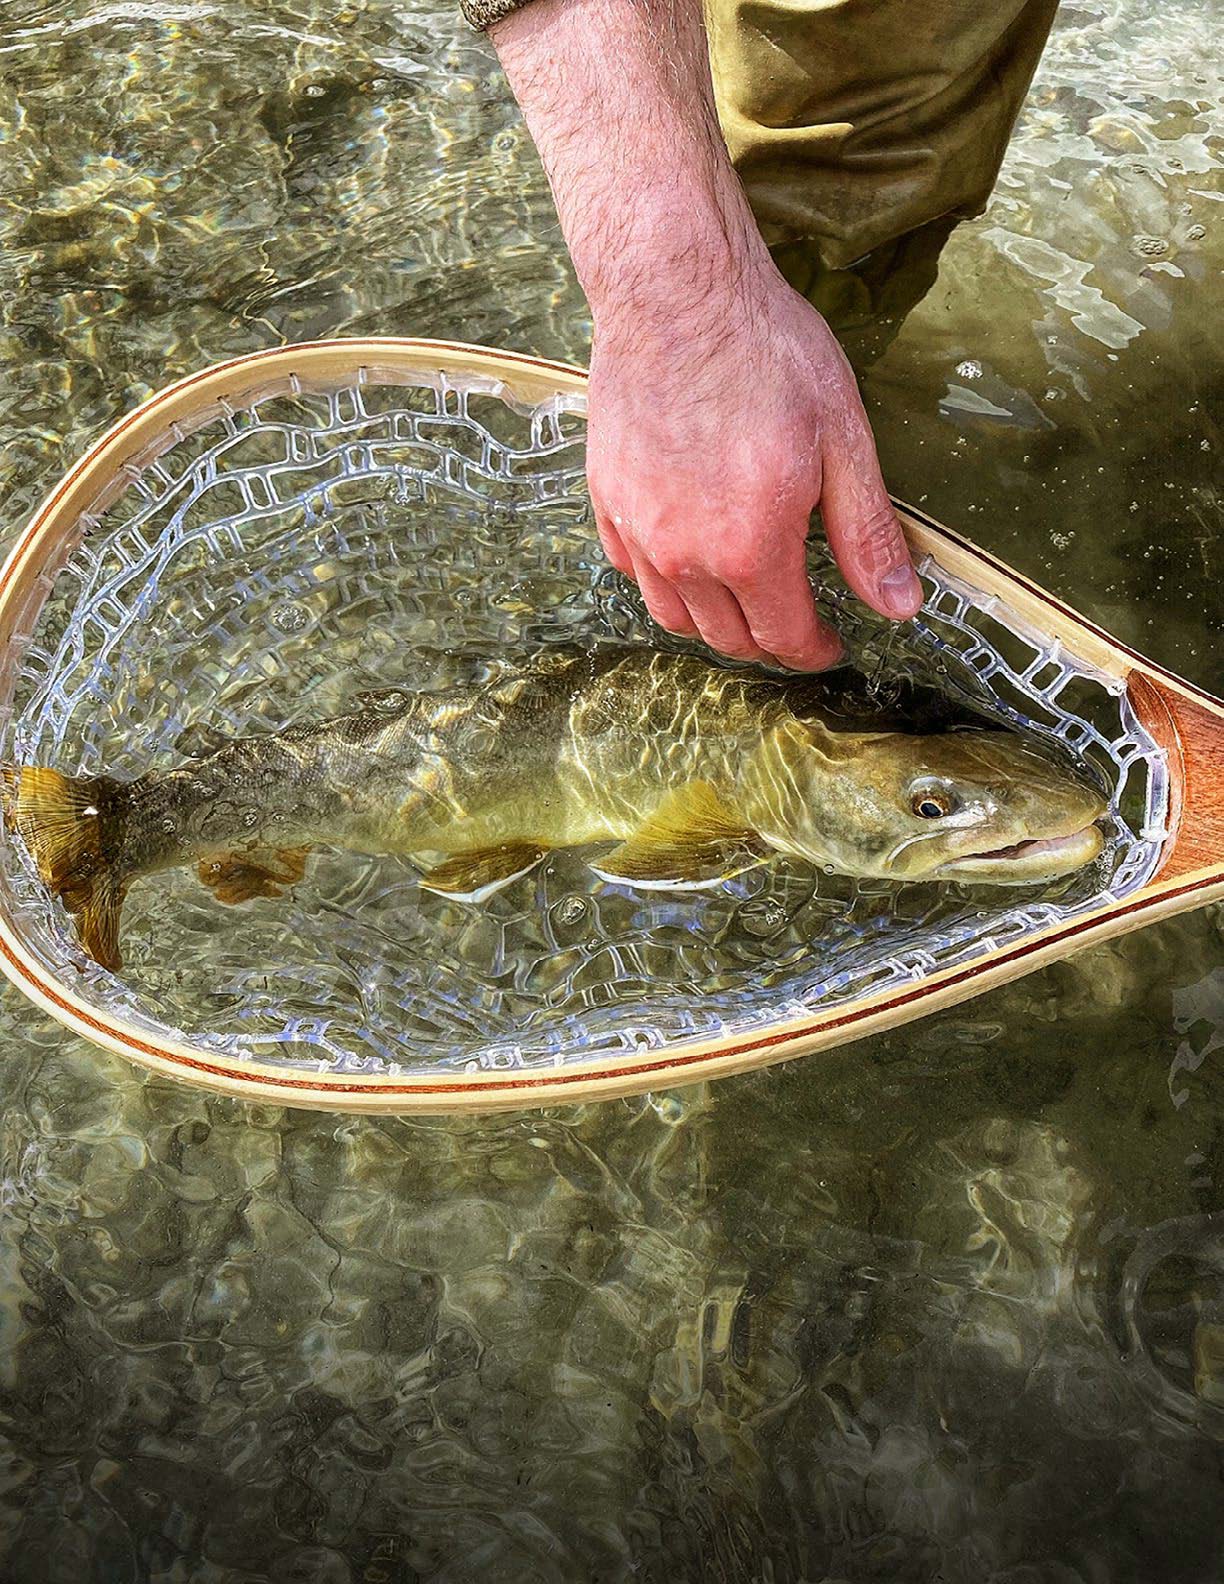 Targeting Early Bull Trout in Alberta - North American Outdoorsman